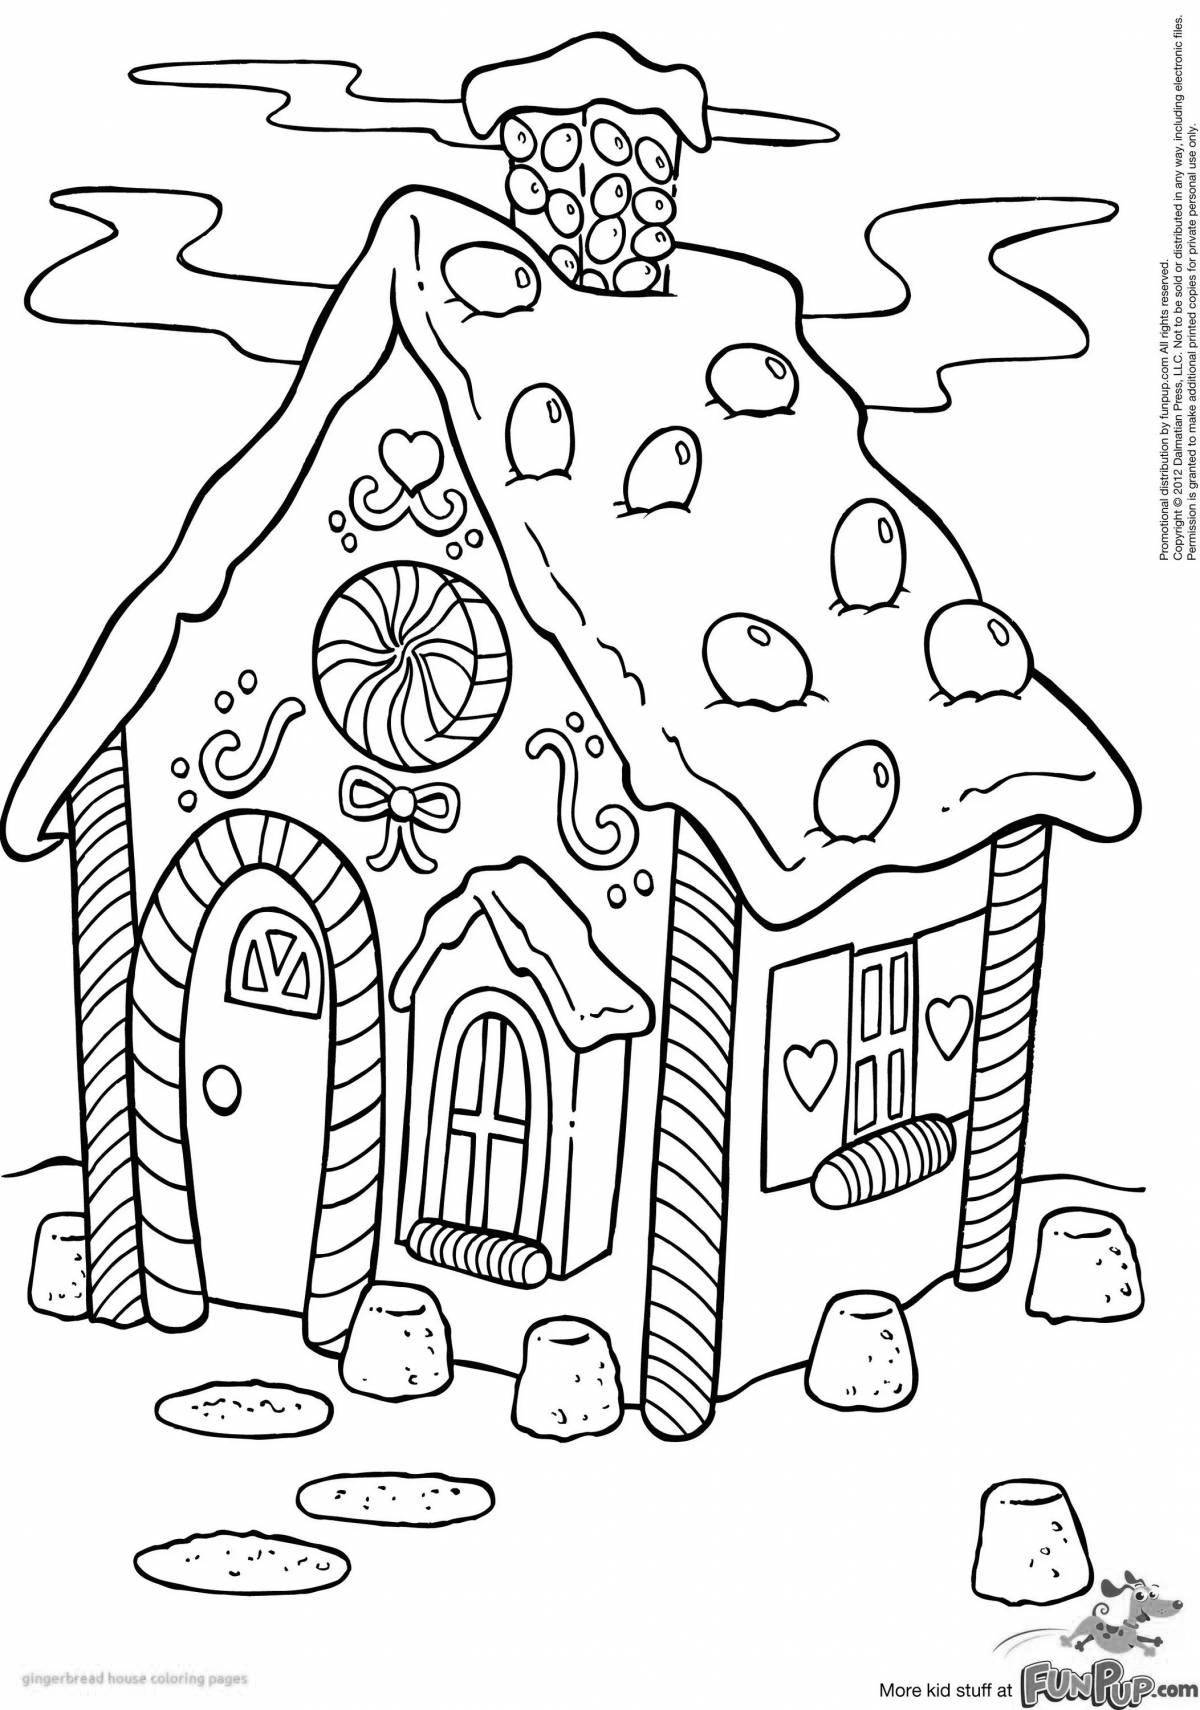 Coloring fairytale gingerbread house for kids